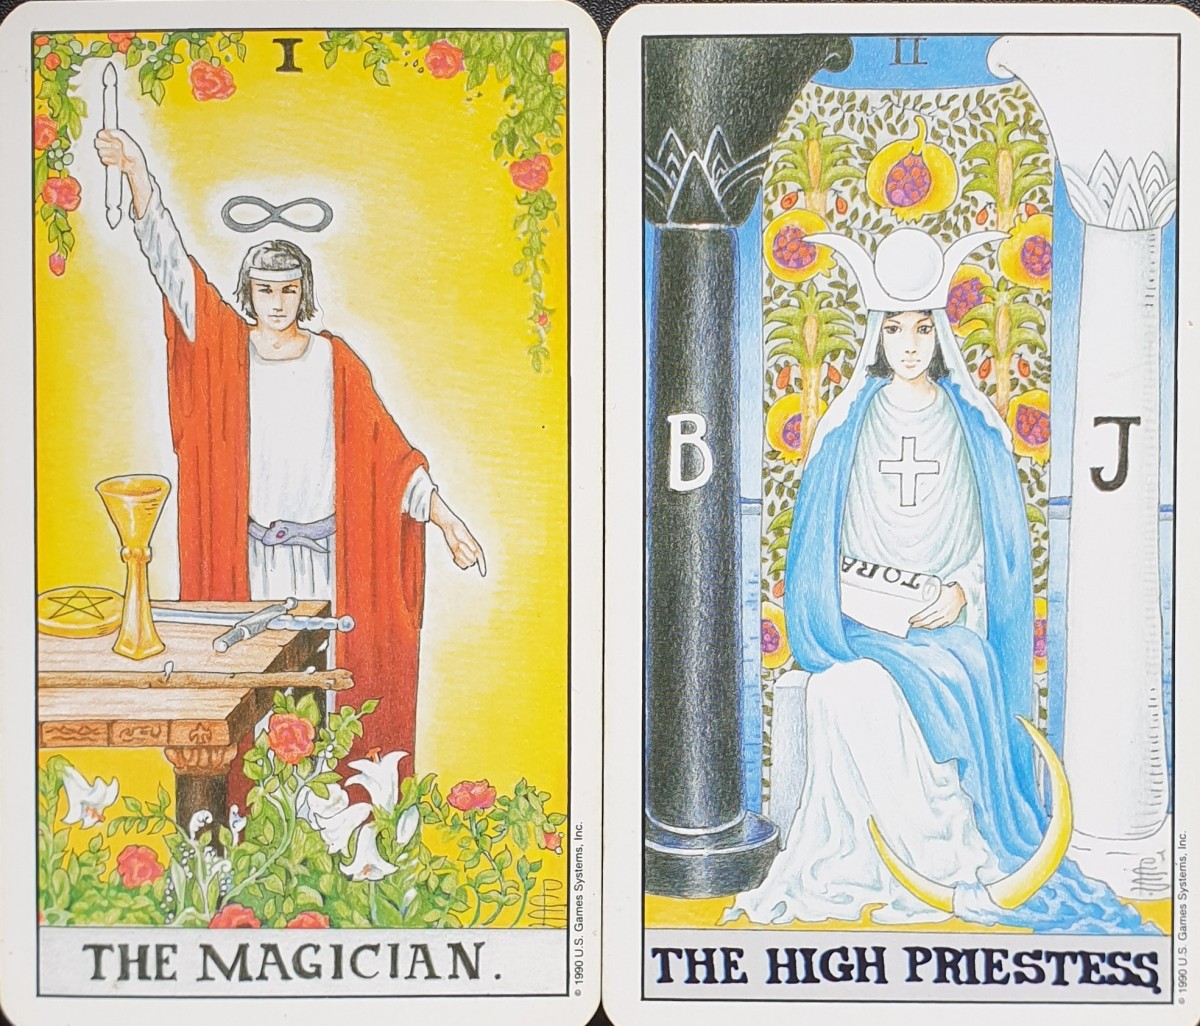 The Magician and High Priestess of Tarot: A Dance of Duality and Symbiology